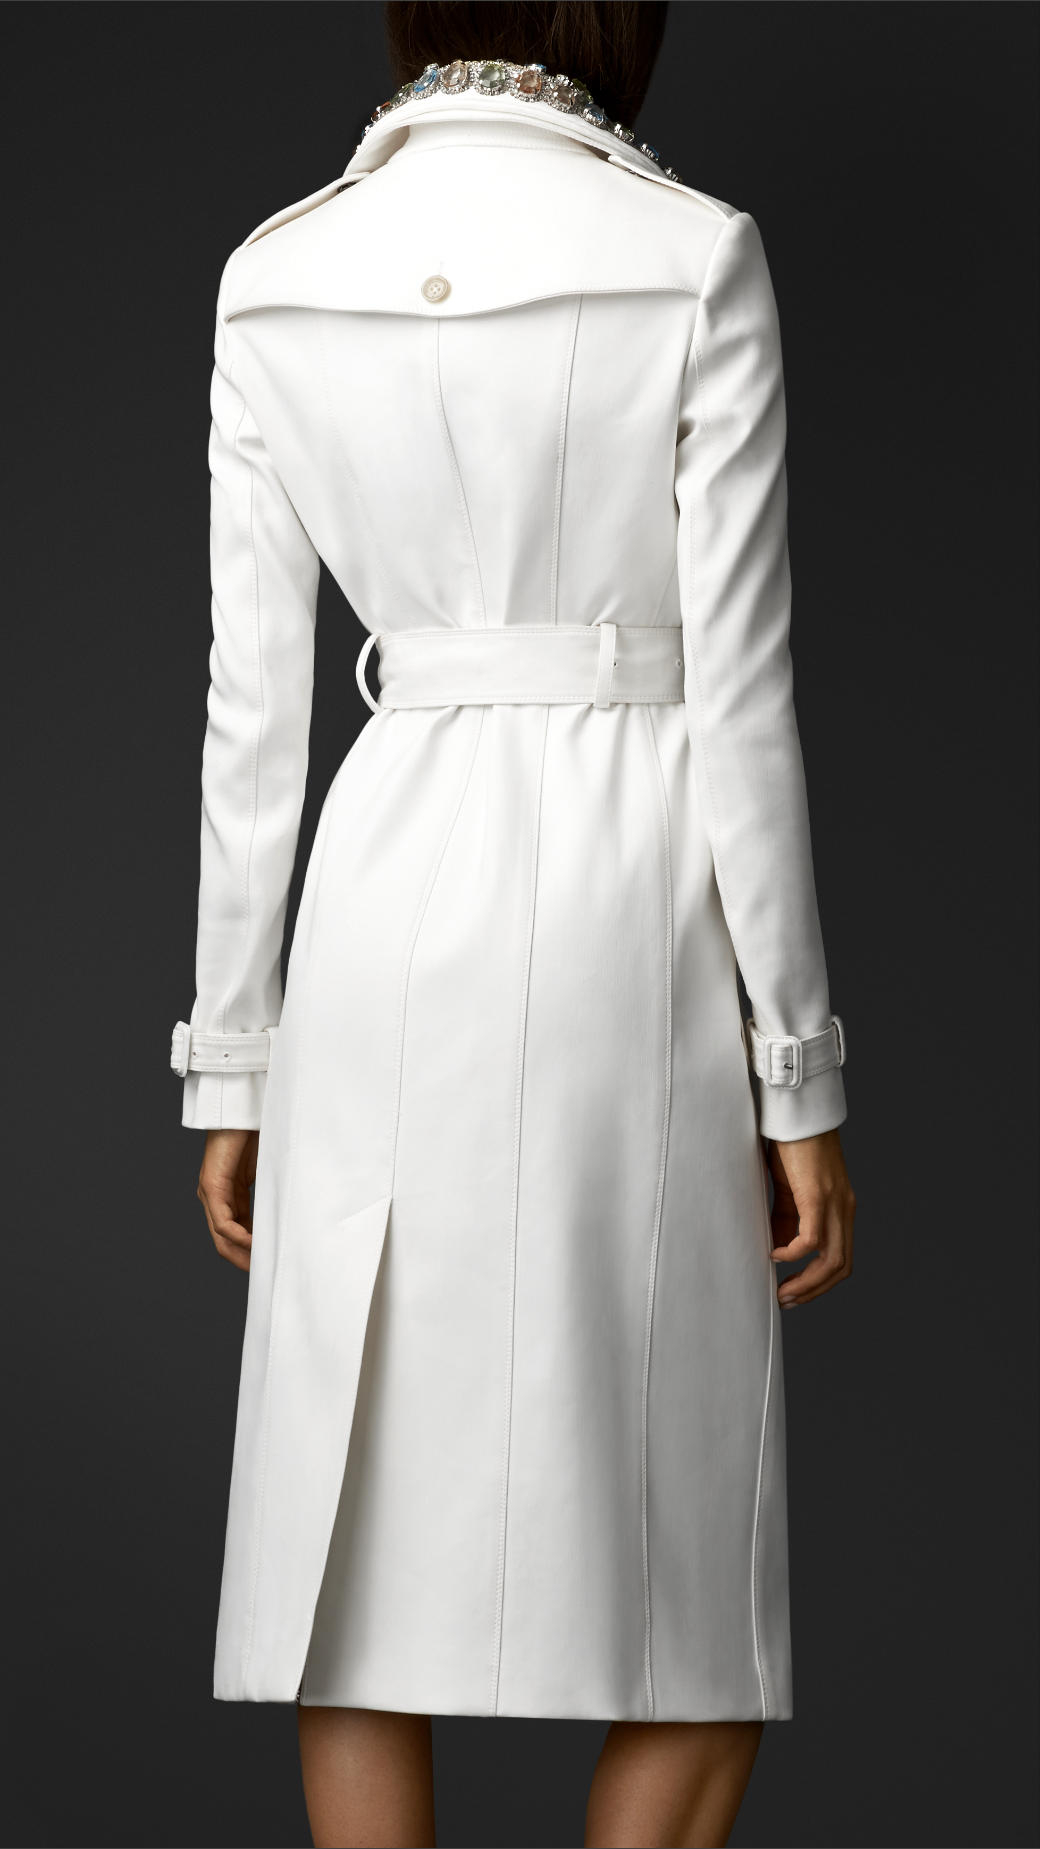 Burberry Gem Collar Trench Coat in White | Lyst